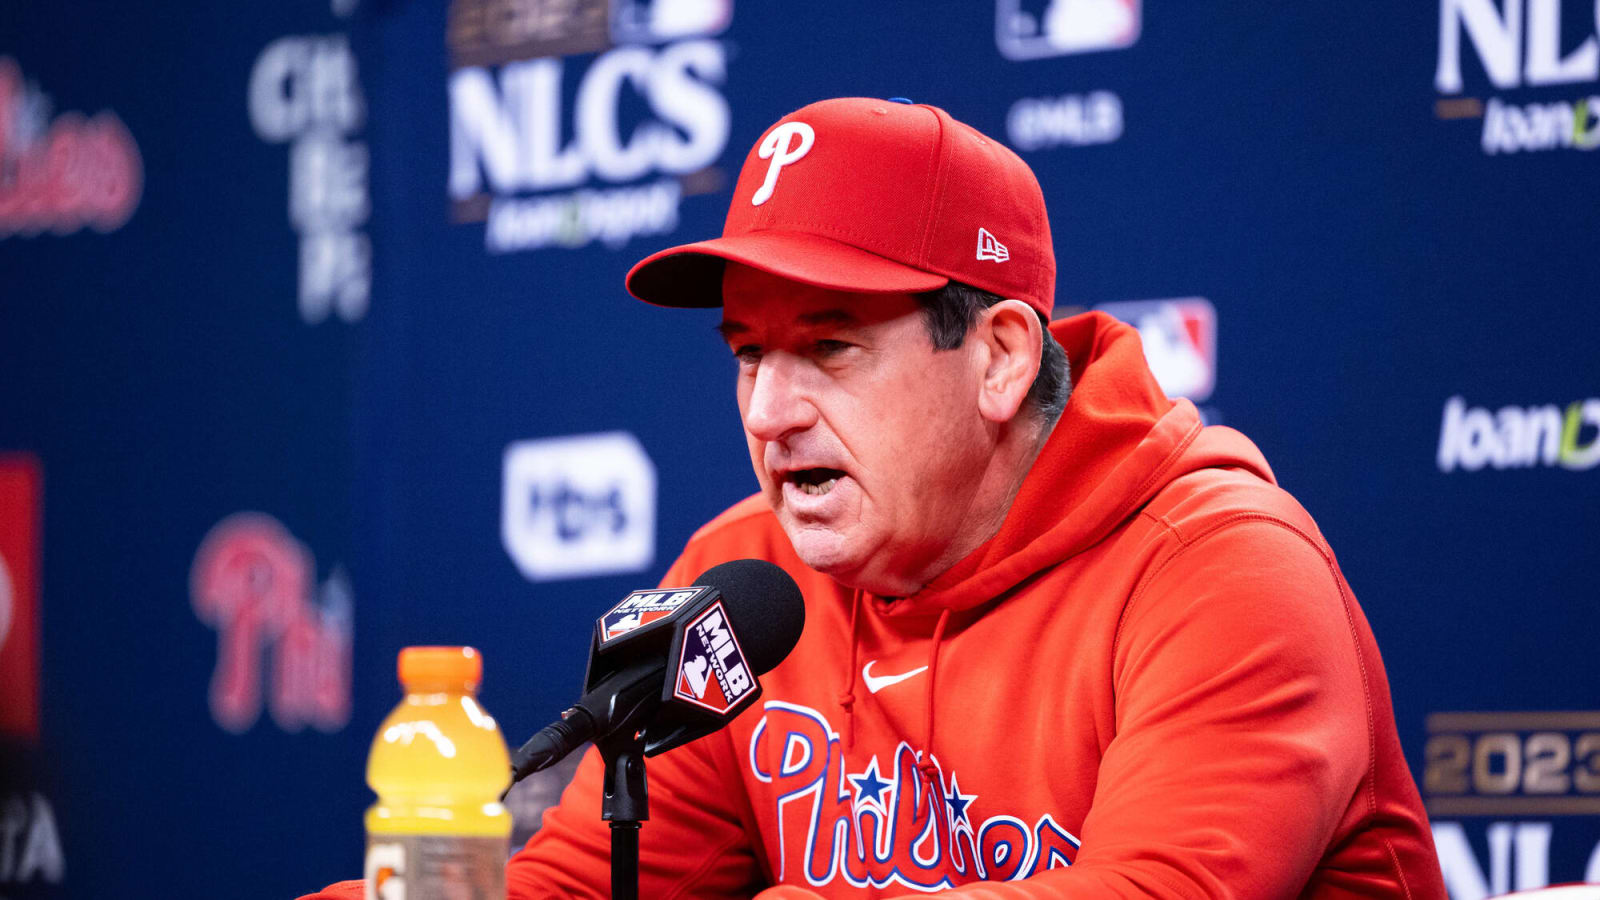 Phillies are ready to redefine what Red October means this time around